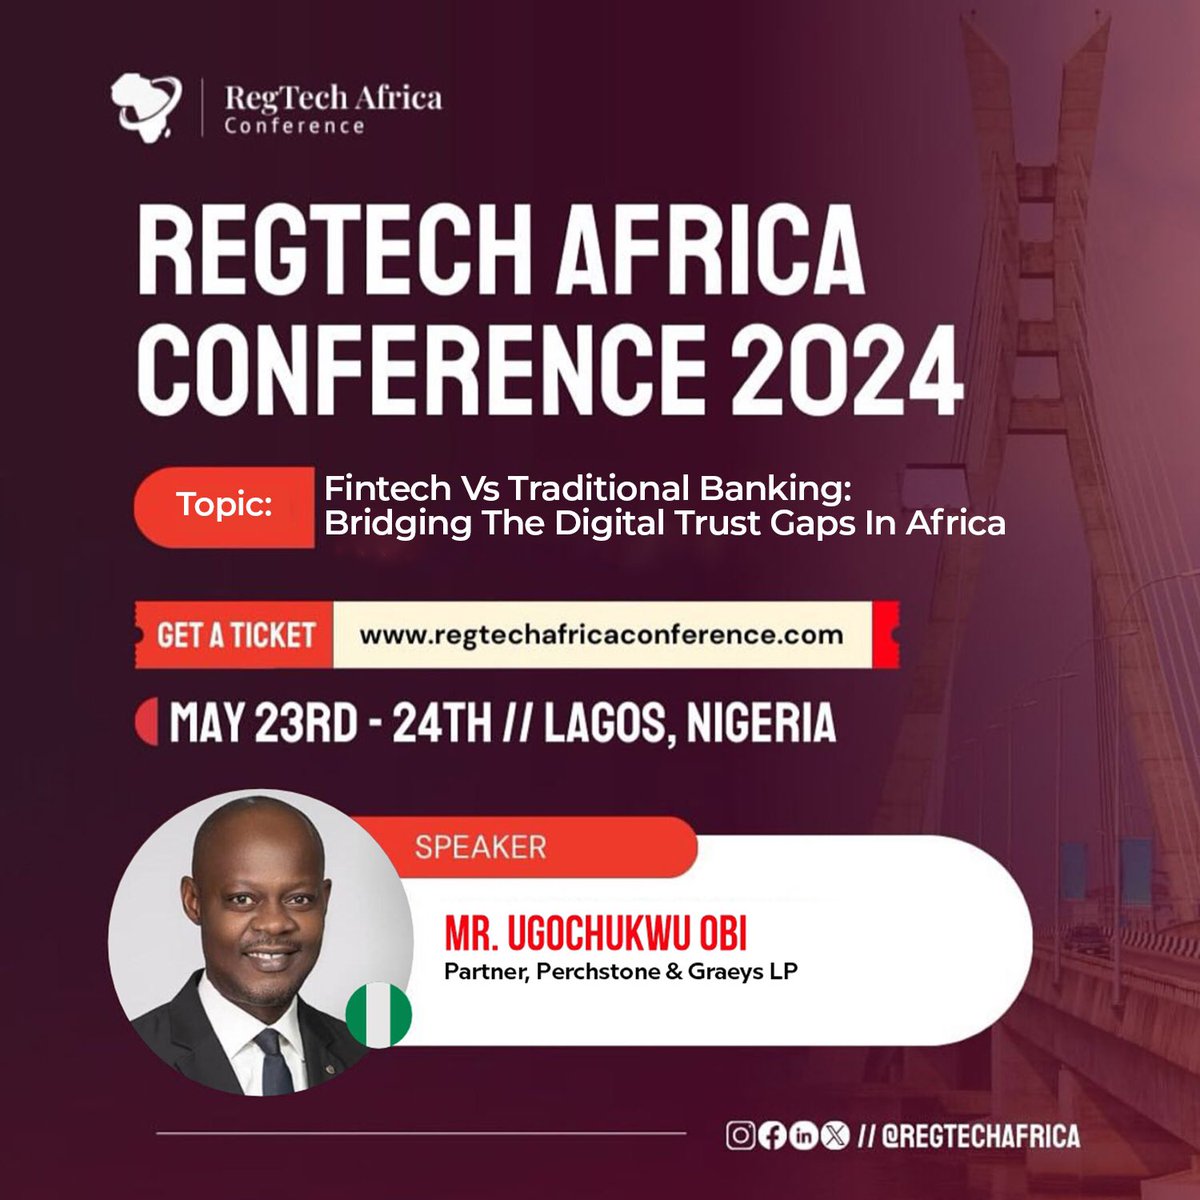 We are thrilled to announce that Mr. Ugochukwu Obi, Partner at the prestigious law firm Perchstone and Graeys, will be taking the stage as a distinguished speaker at this groundbreaking event! 

Tickets 👇regtechafricaconference.com 

#PerchstoneAndGraeys #RegtechAfricaConference